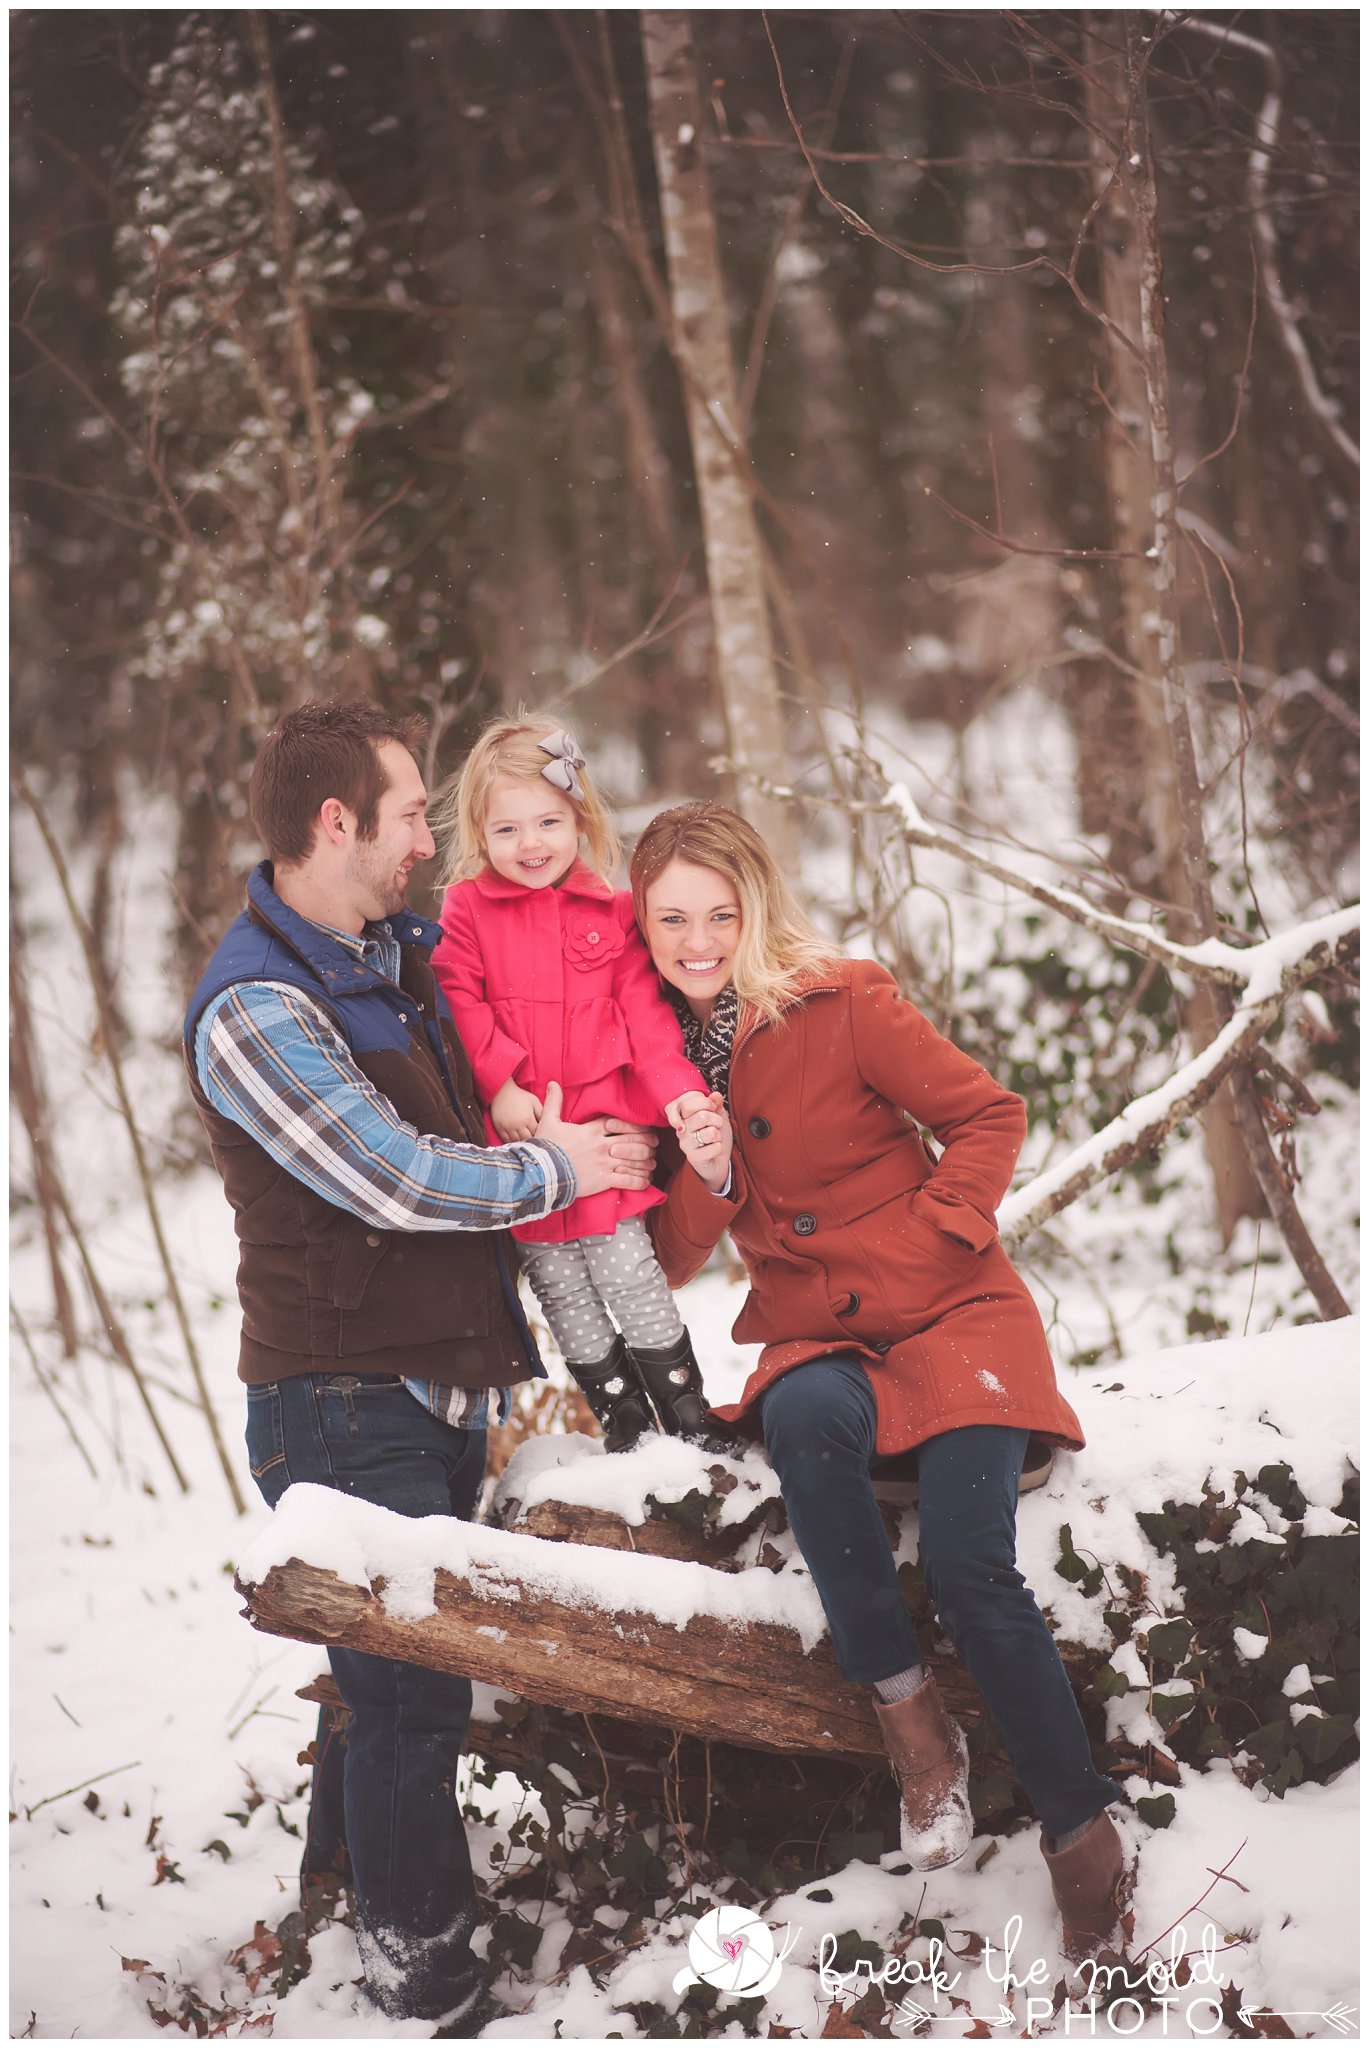 break-the-mold-photo-snowy-day-engagement-photos-knoxville-tn-tennessee-snow-day-pictures-winter-outdoor-unique-family_1510.jpg